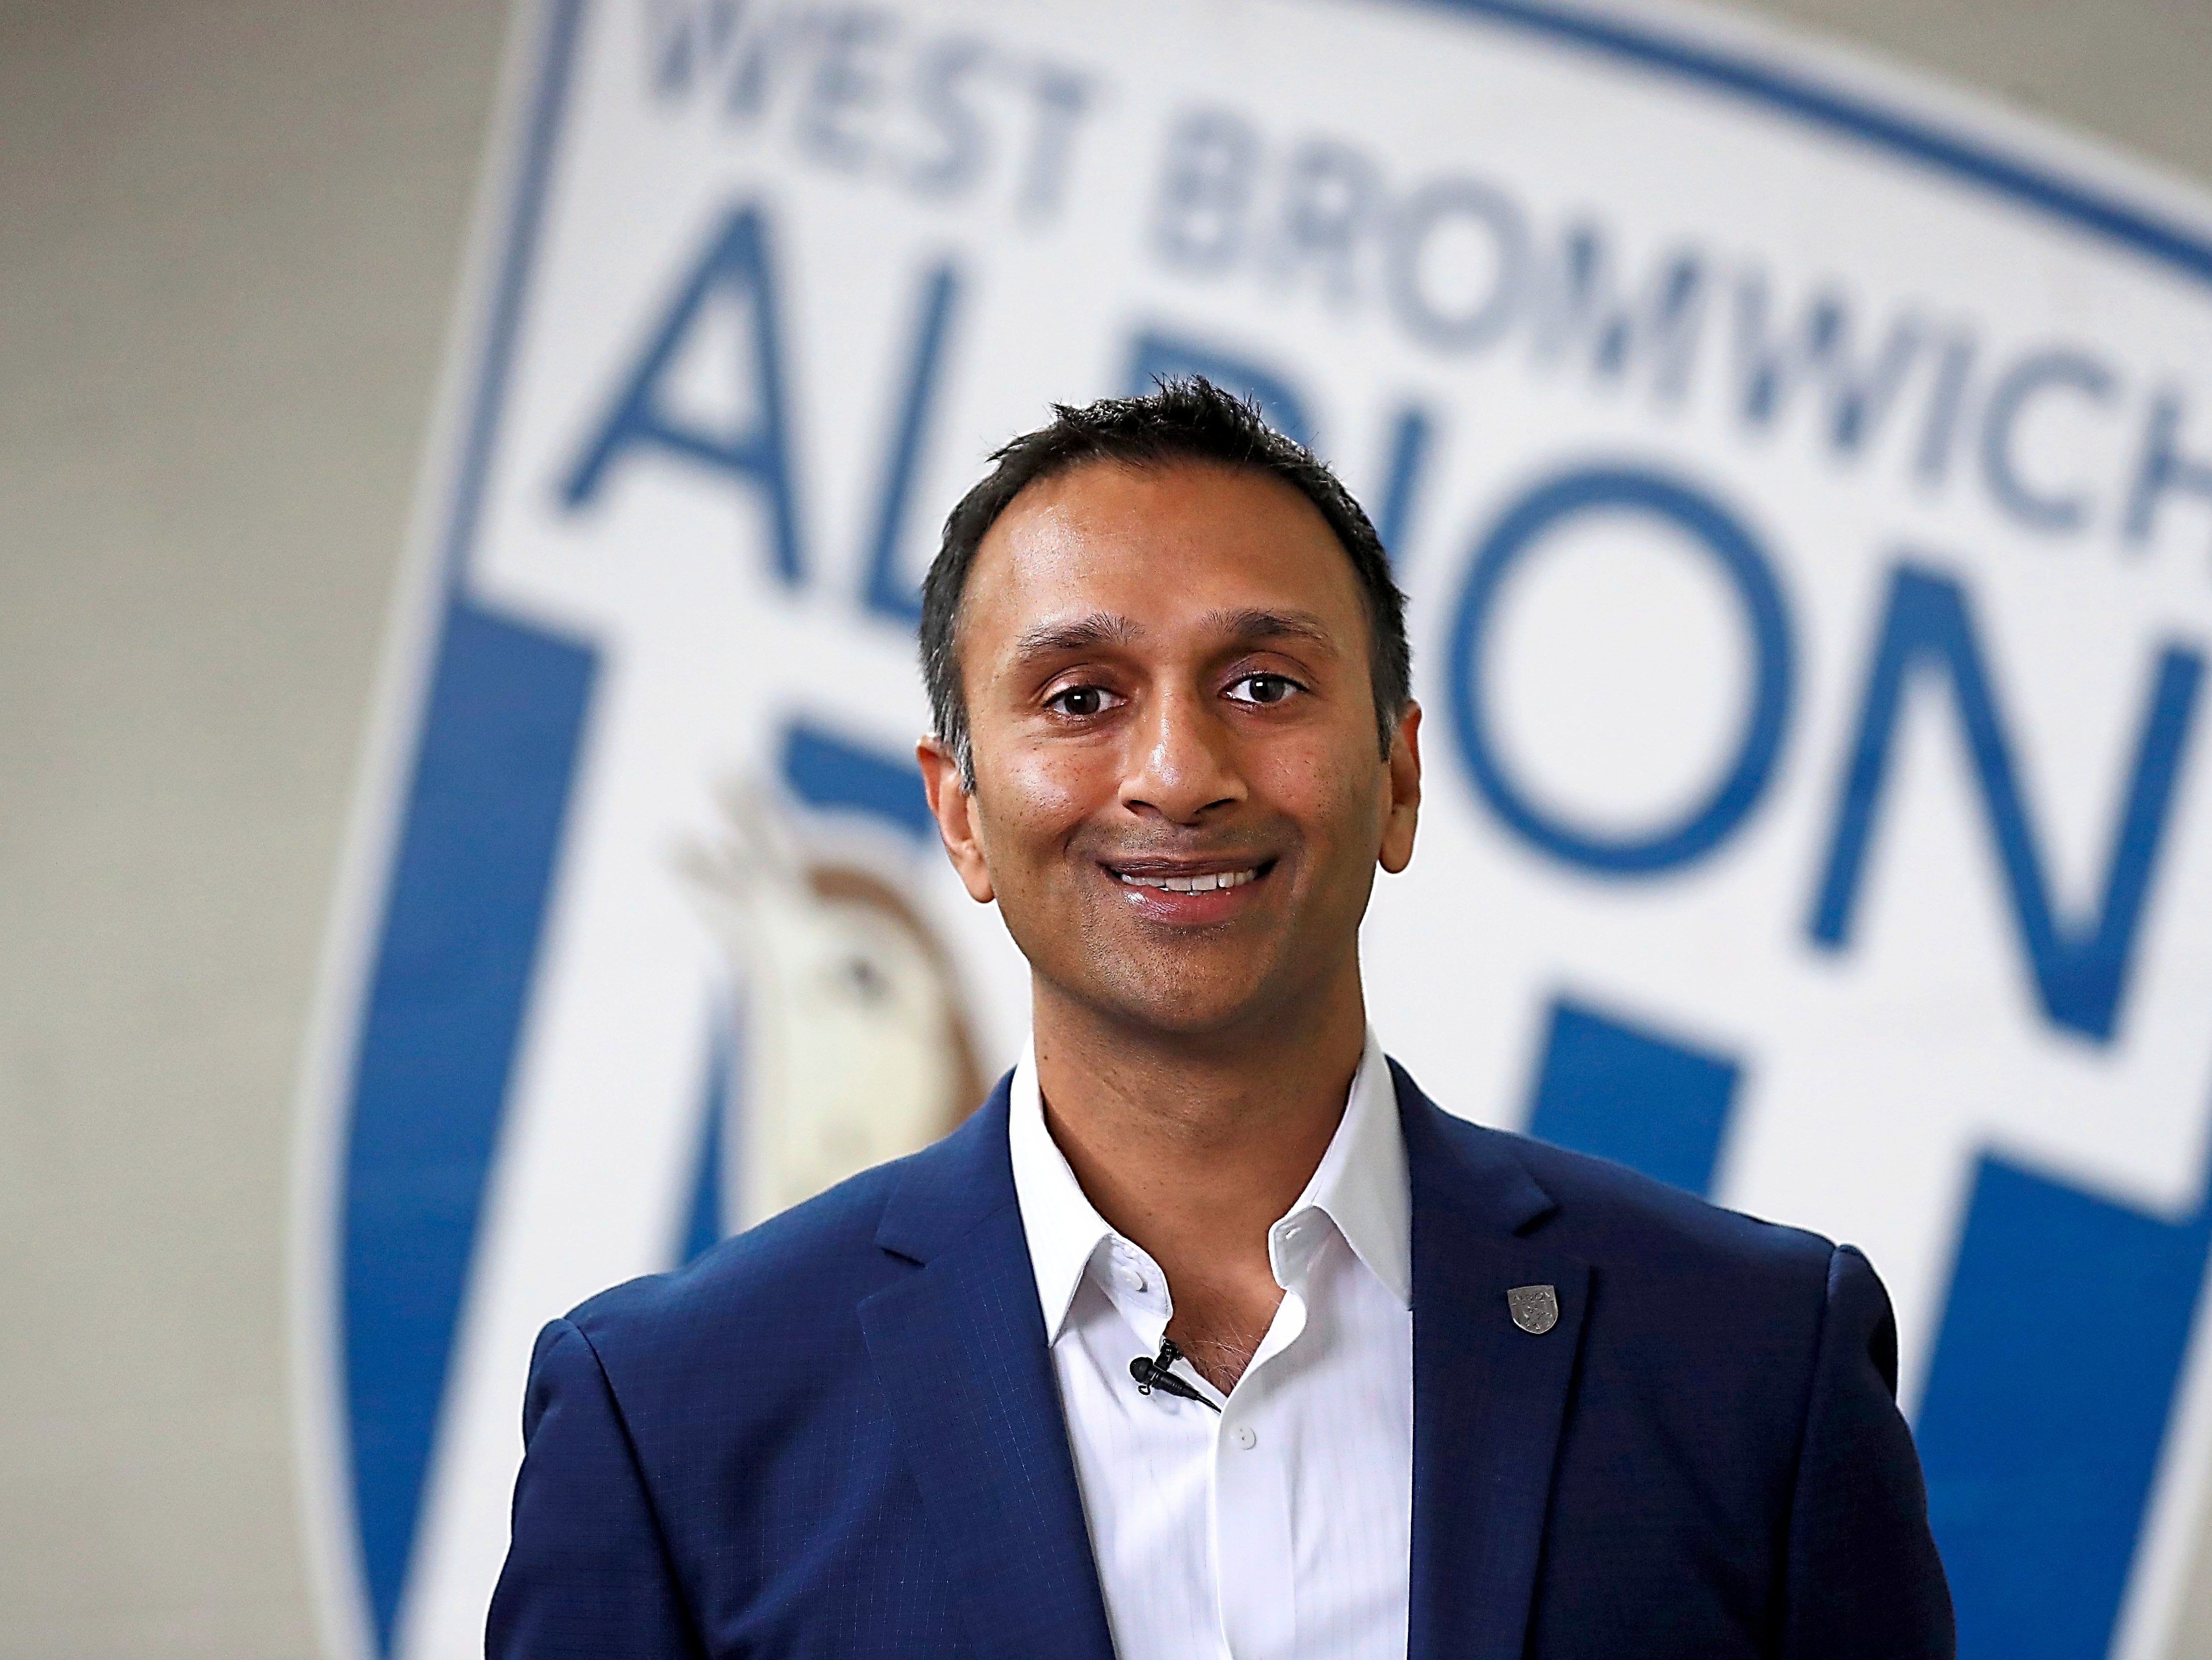 West Brom in 'safe hands' with Shilen Patel - but fan concern over financial measures